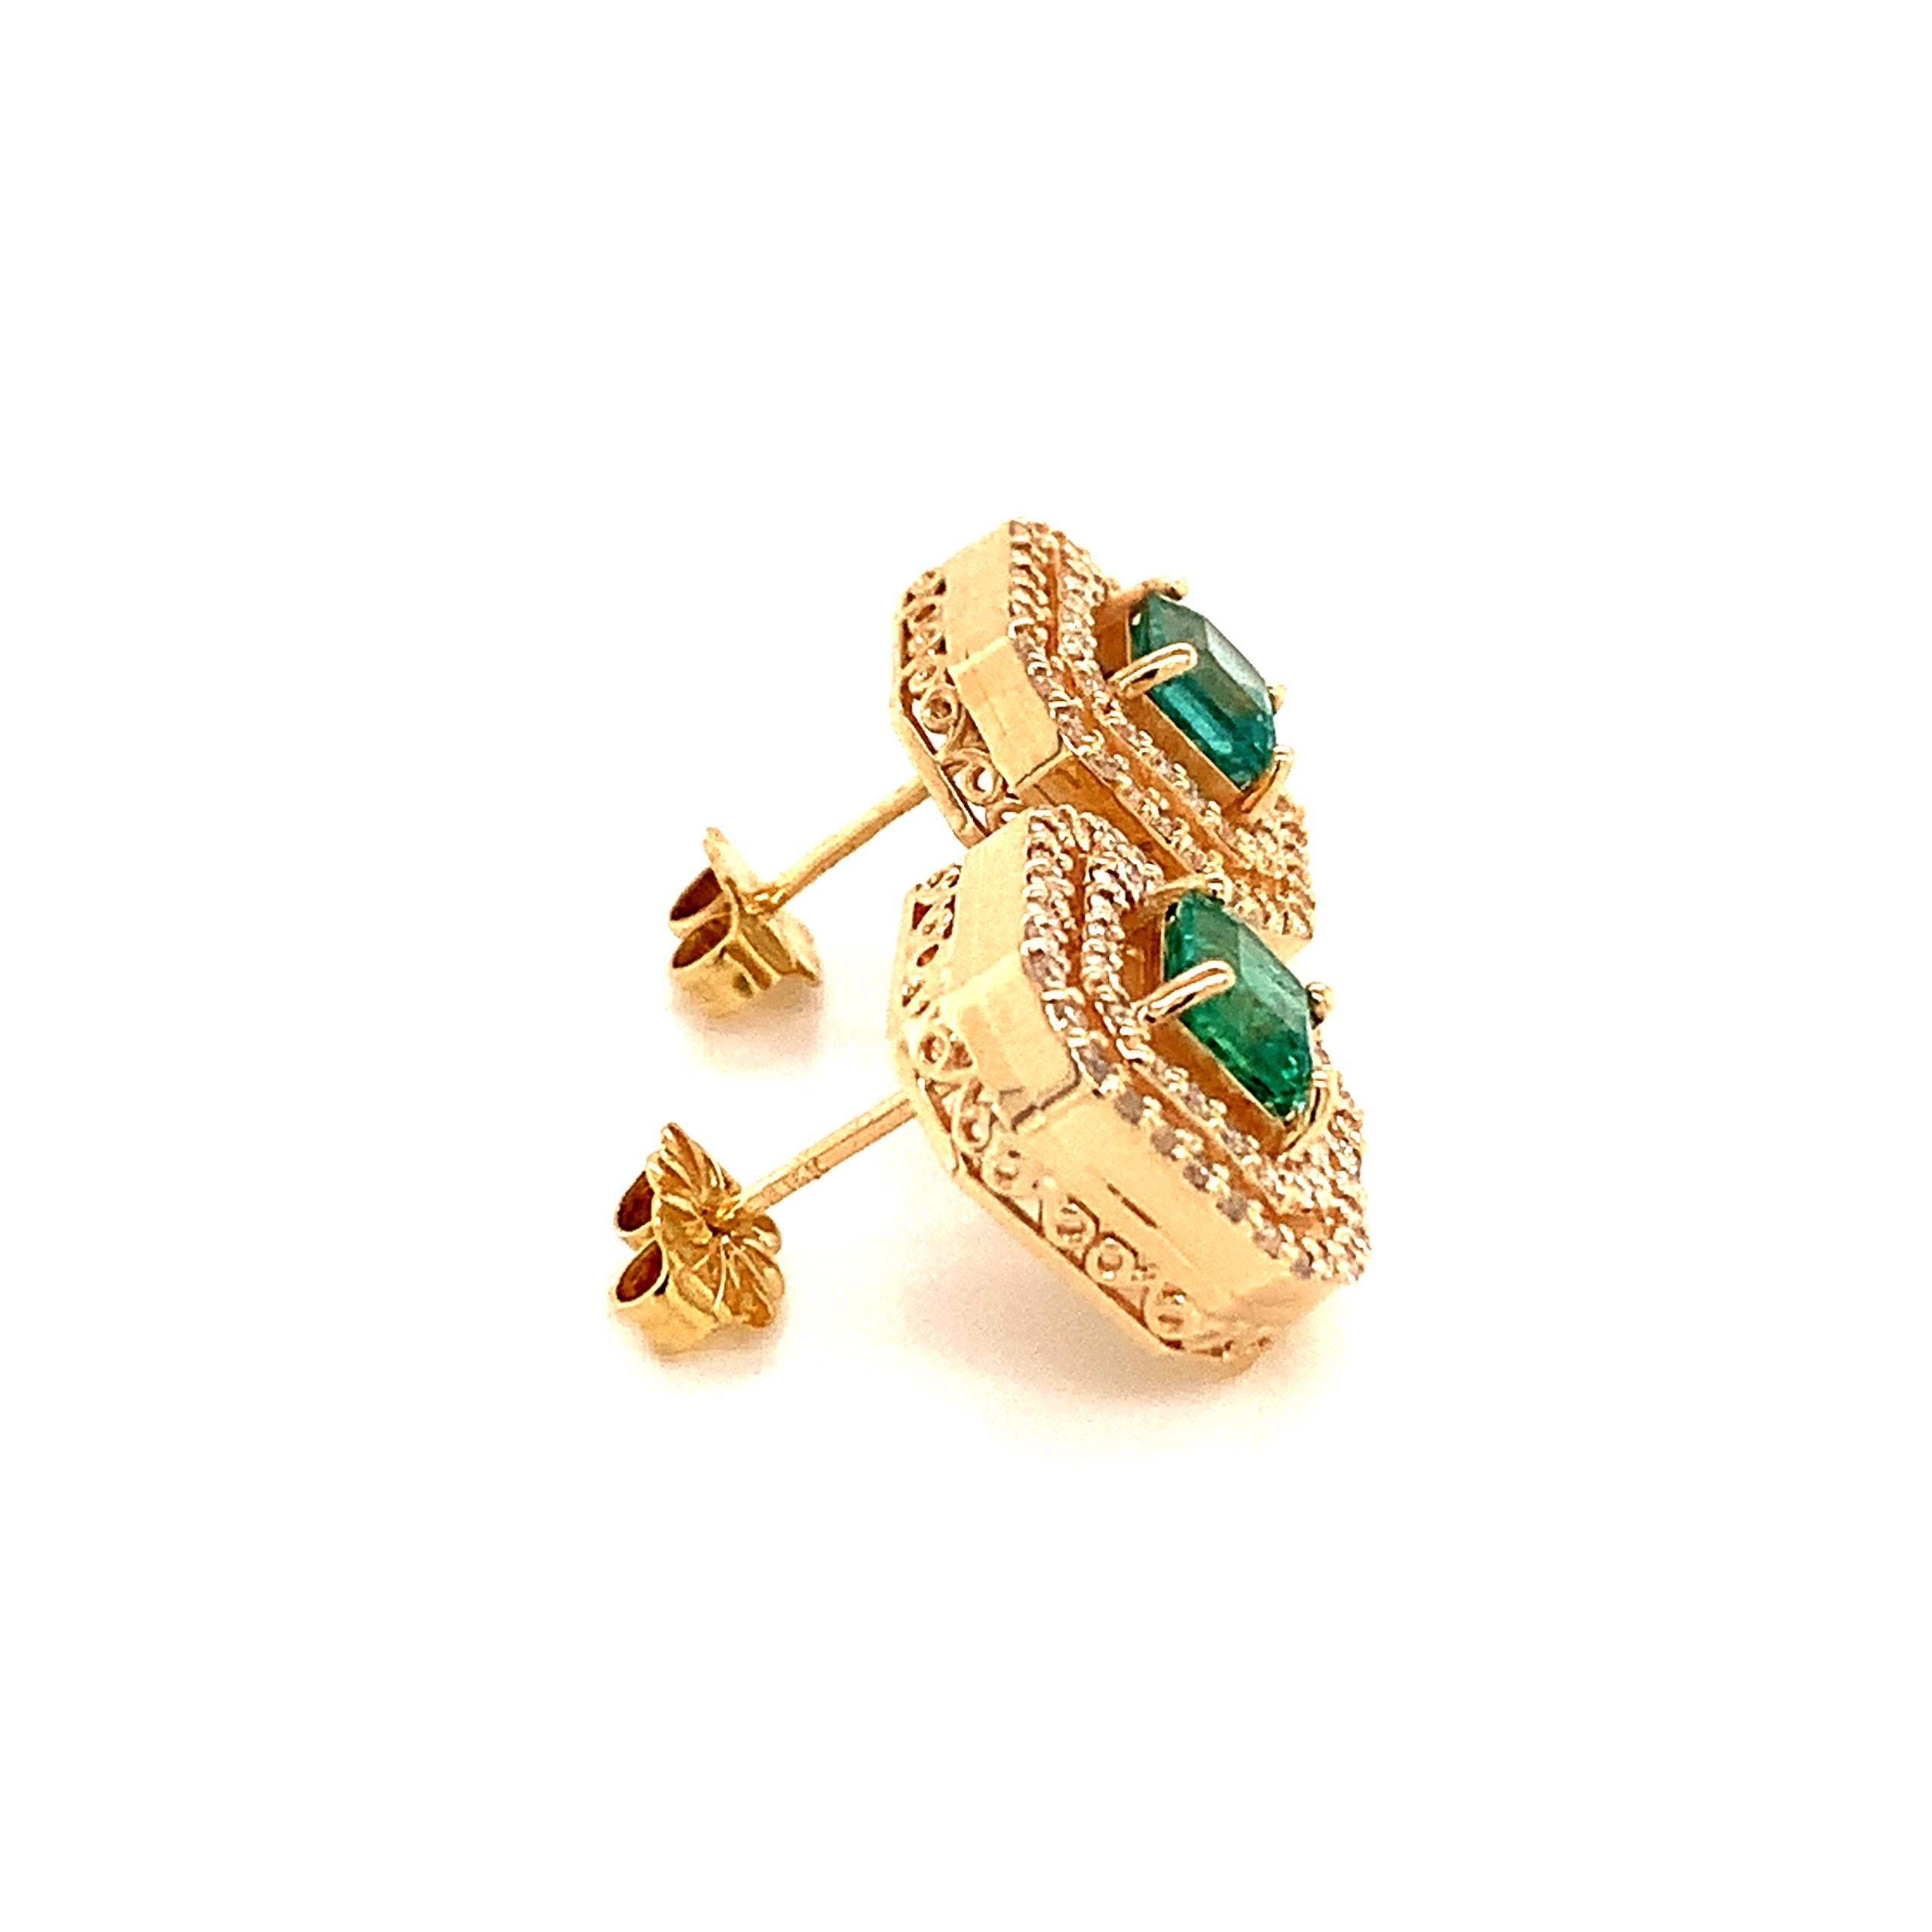 Natural Emerald Diamond Earrings 14k Gold 1.52 TCW Certified For Sale 4